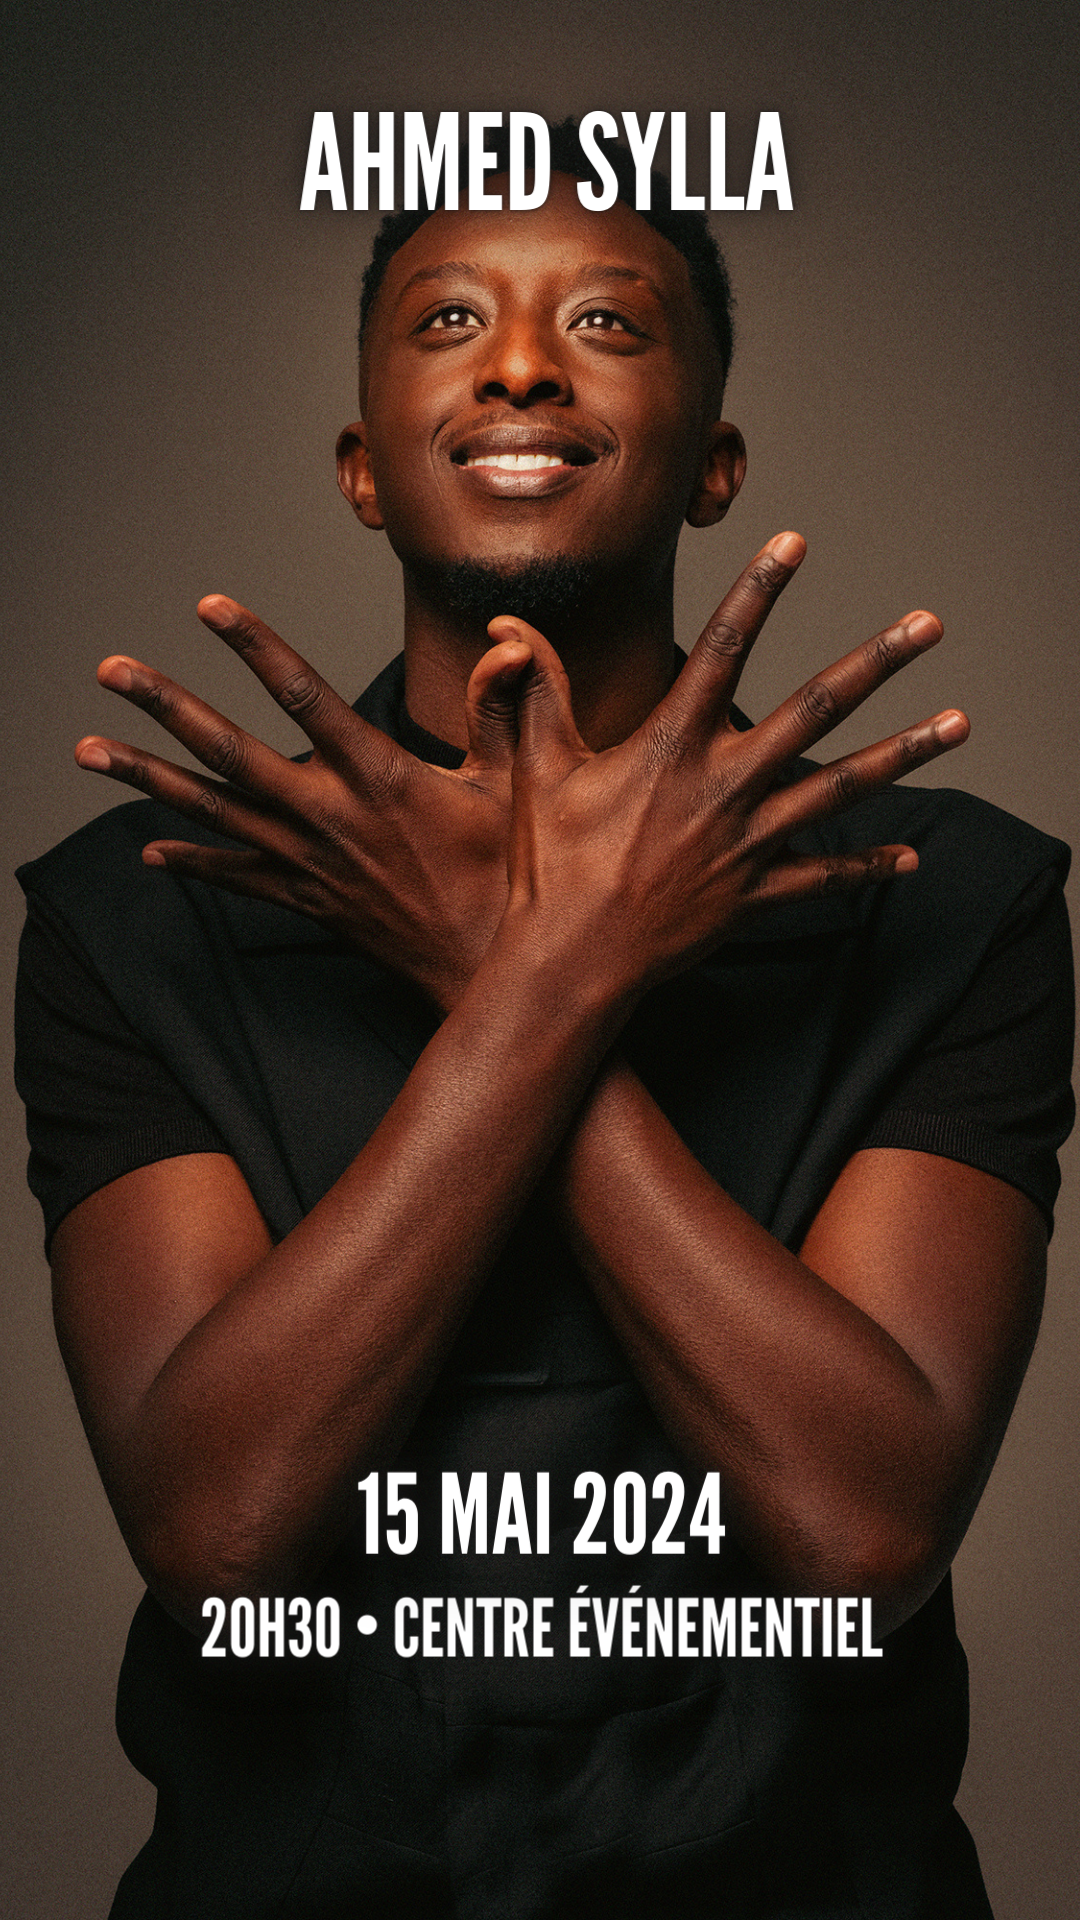 Ahmed Sylla, spectacle à Courbevoie, infos sur sortiracourbevoie.fr